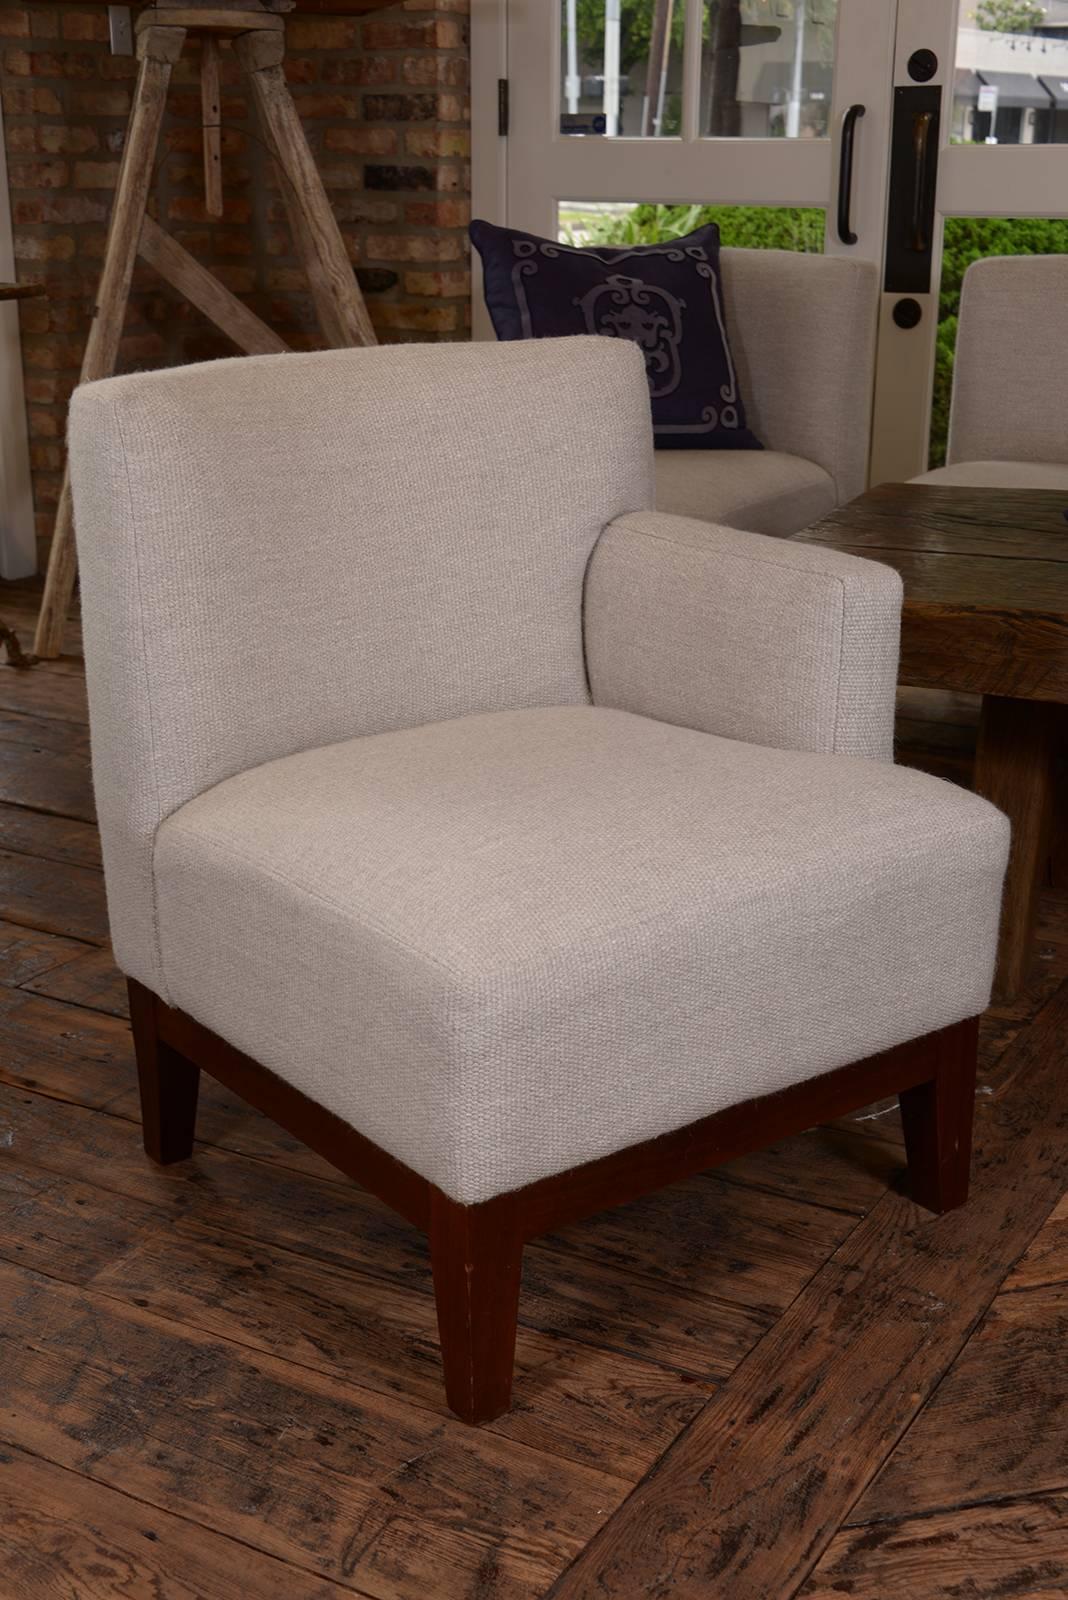 Very chic pair of club chairs with opposing arm on each side of the chairs. From a London hotel in the 1950s. Upholstered in a gorgeous Rosemary Hallgarten double weave fabric.
Sold as pairs, and we have several available.